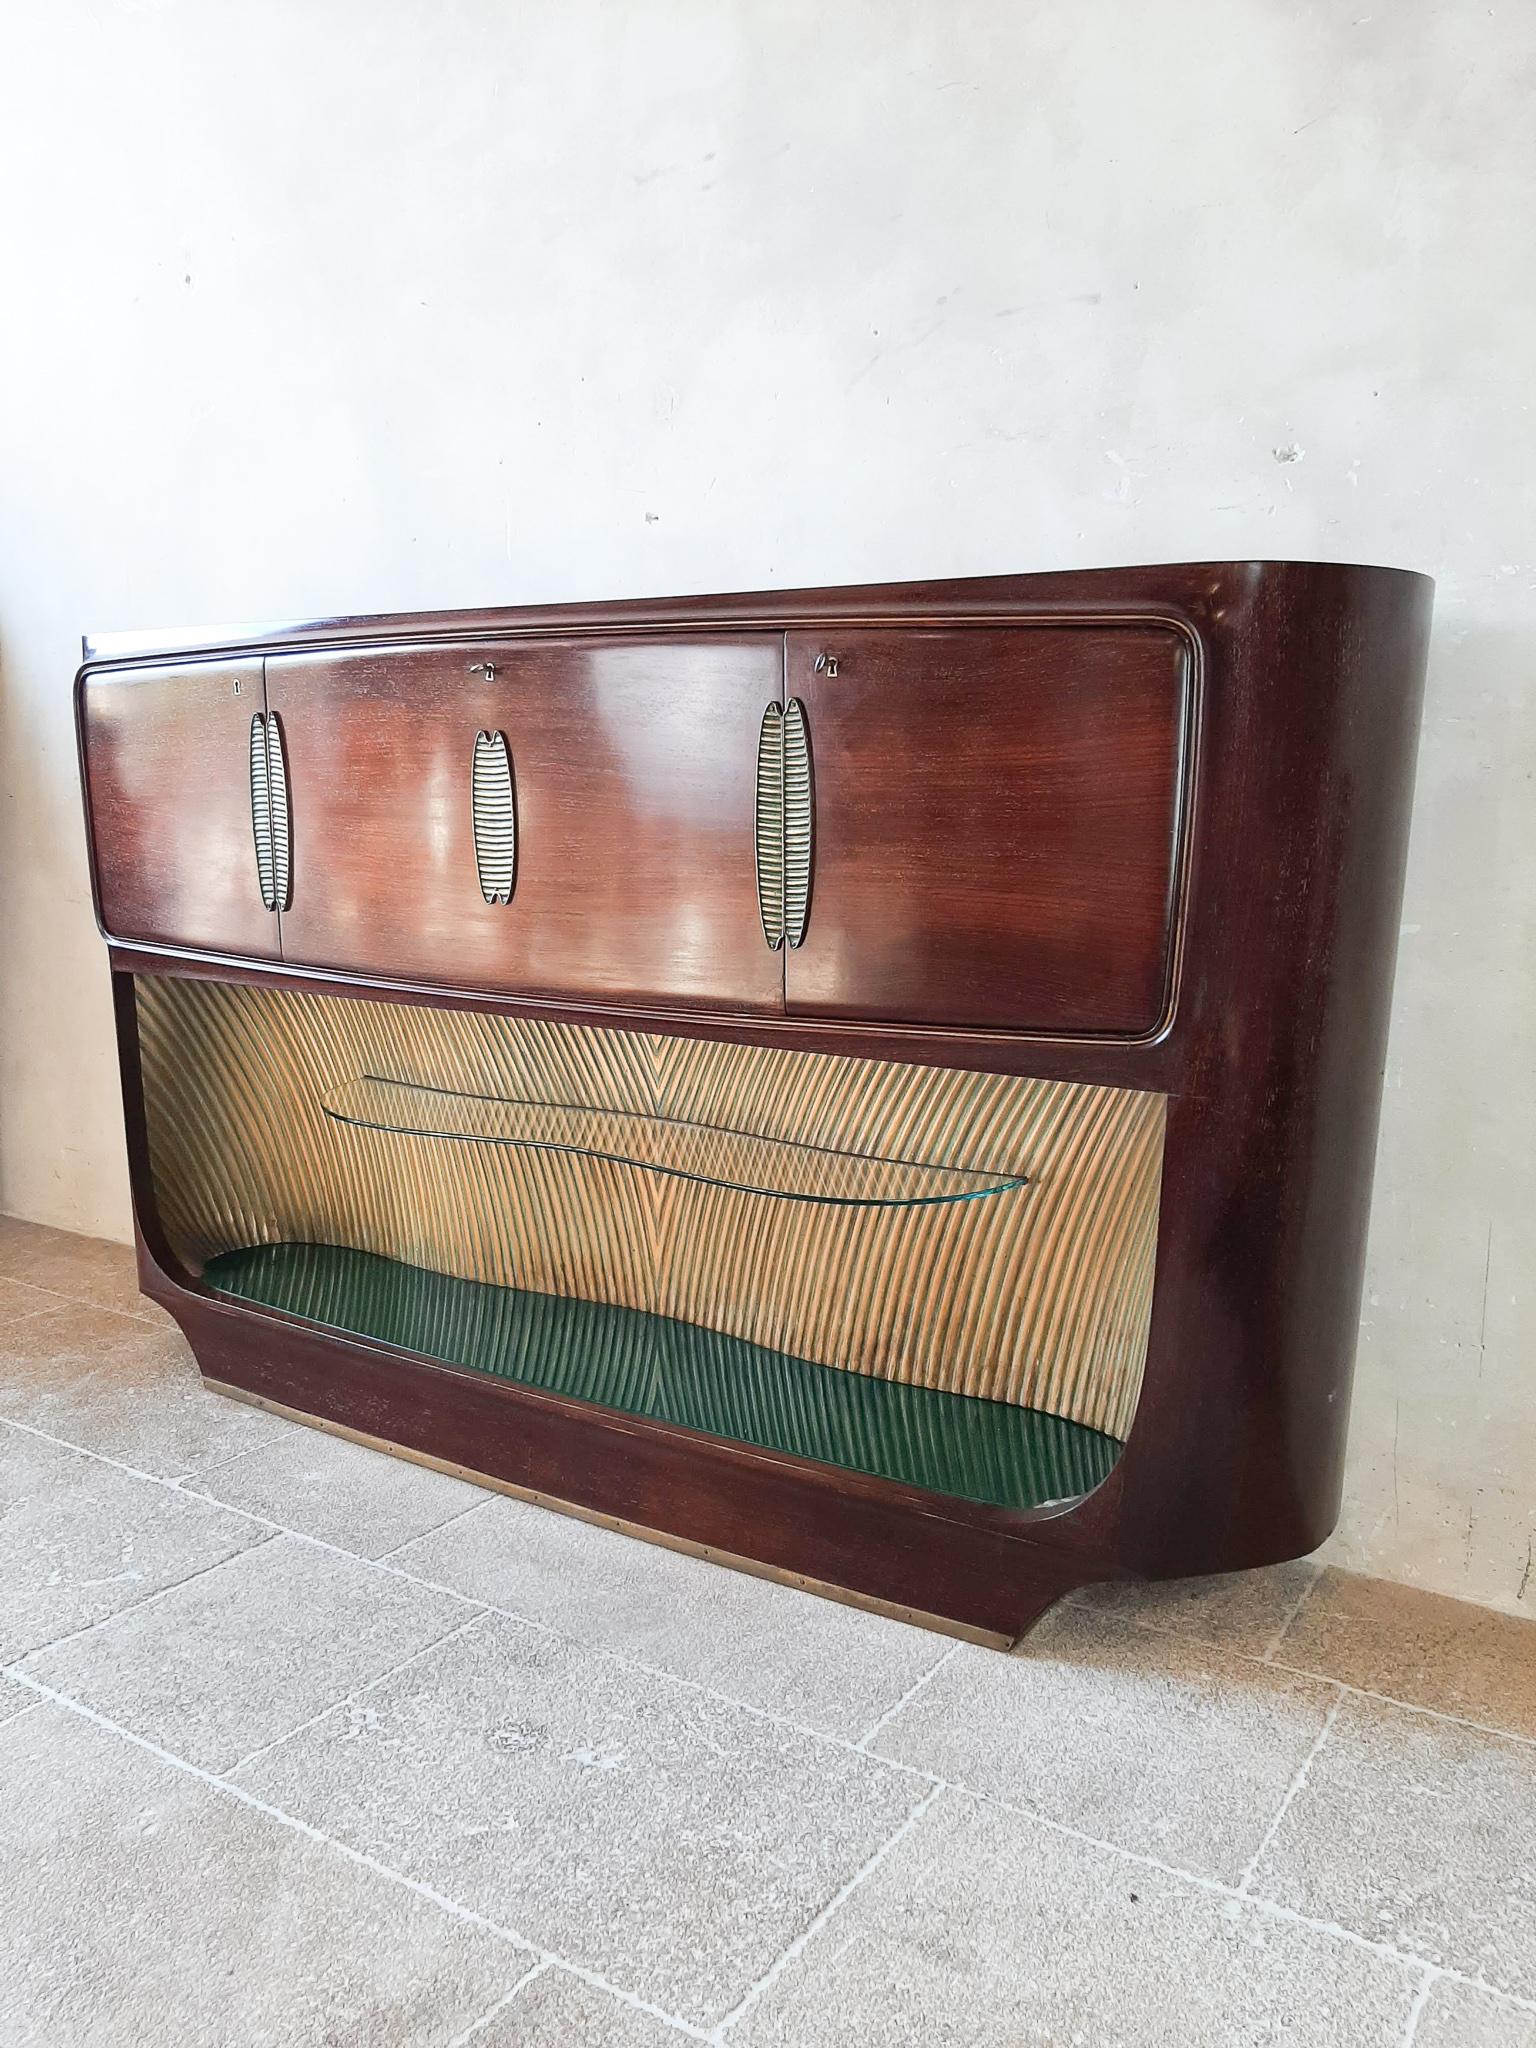 Vittorio Dassi design drybar / sideboard for Palazzi dell’Arte Cantù.

Rosewood bar cabinet with two side doors, mirrored central bar compartment with flap opening and lights, front decorations in brass, upper and lower top in green glass, above